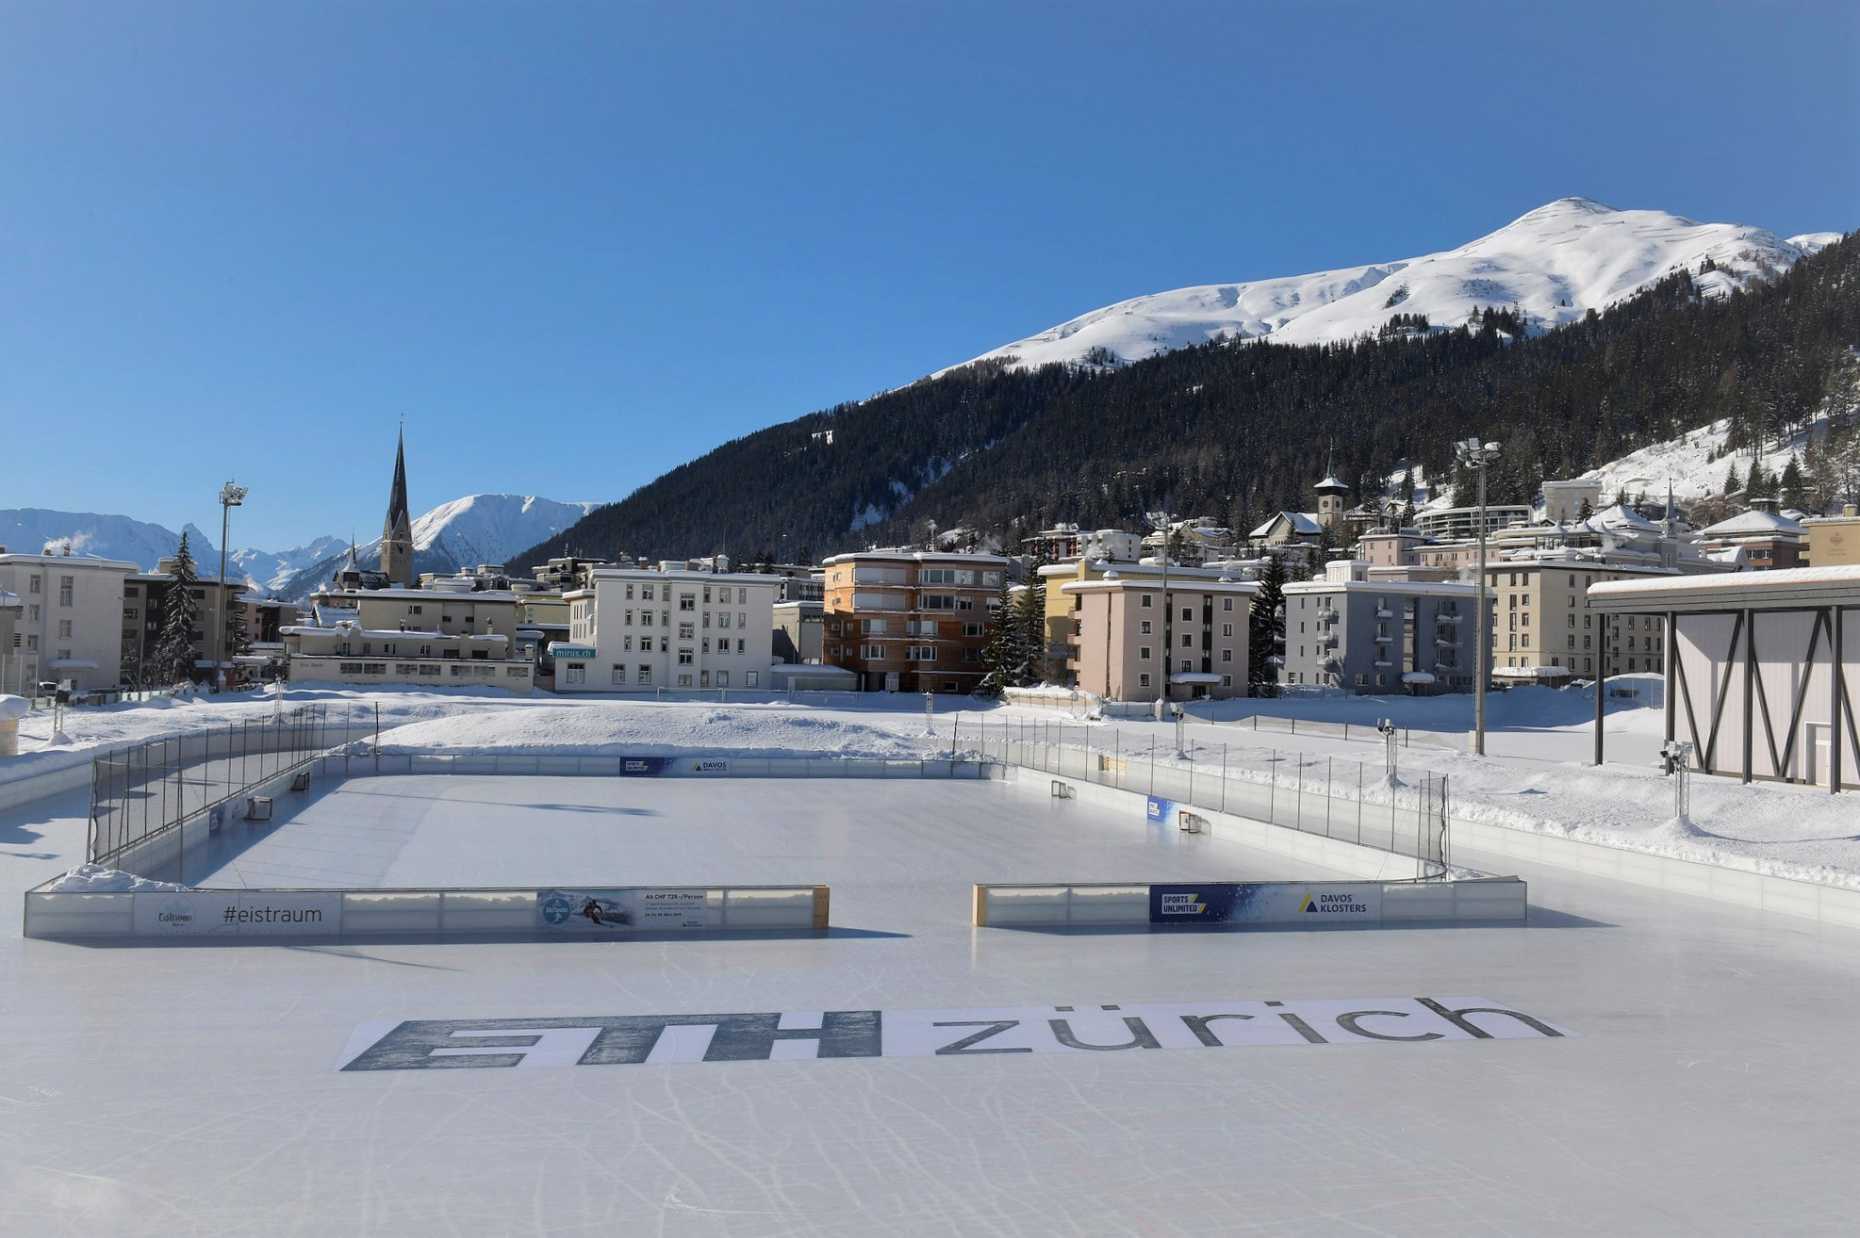 ETH Zurich in Davos_image_Andreas Eggenberger